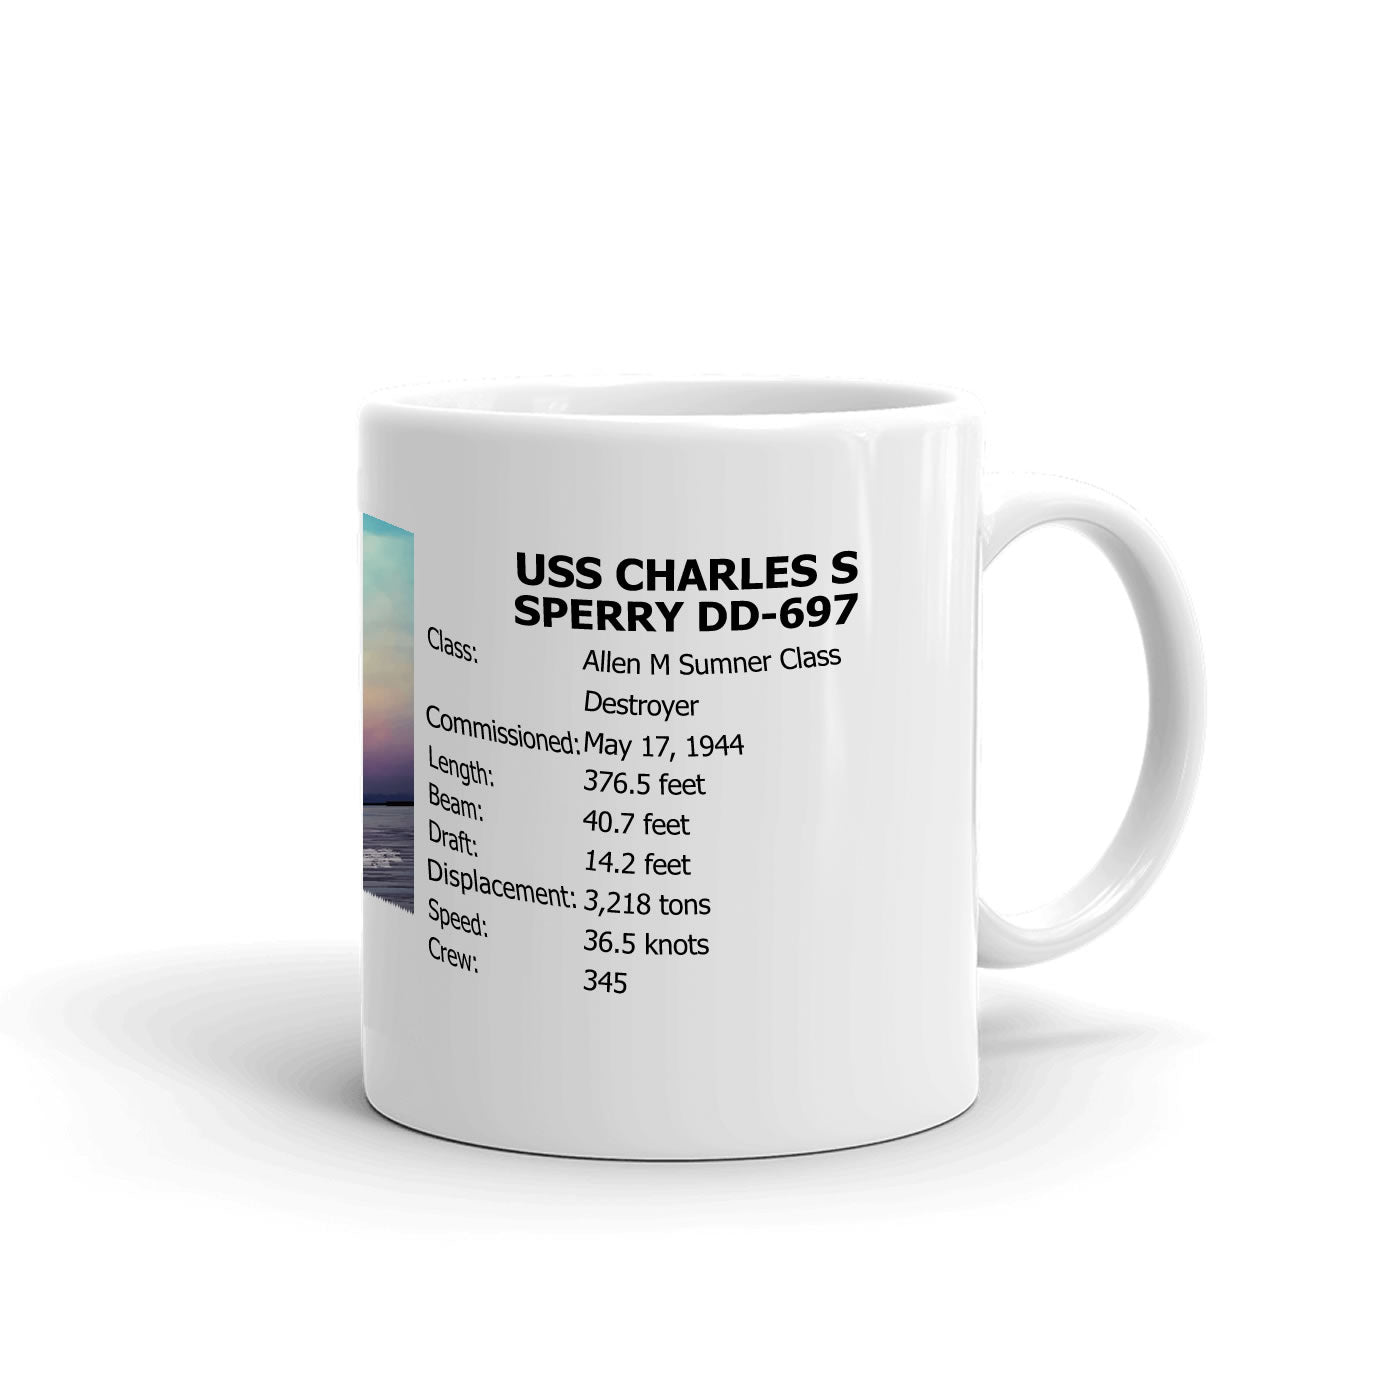 USS Charles S Sperry DD-697 Coffee Cup Mug Right Handle